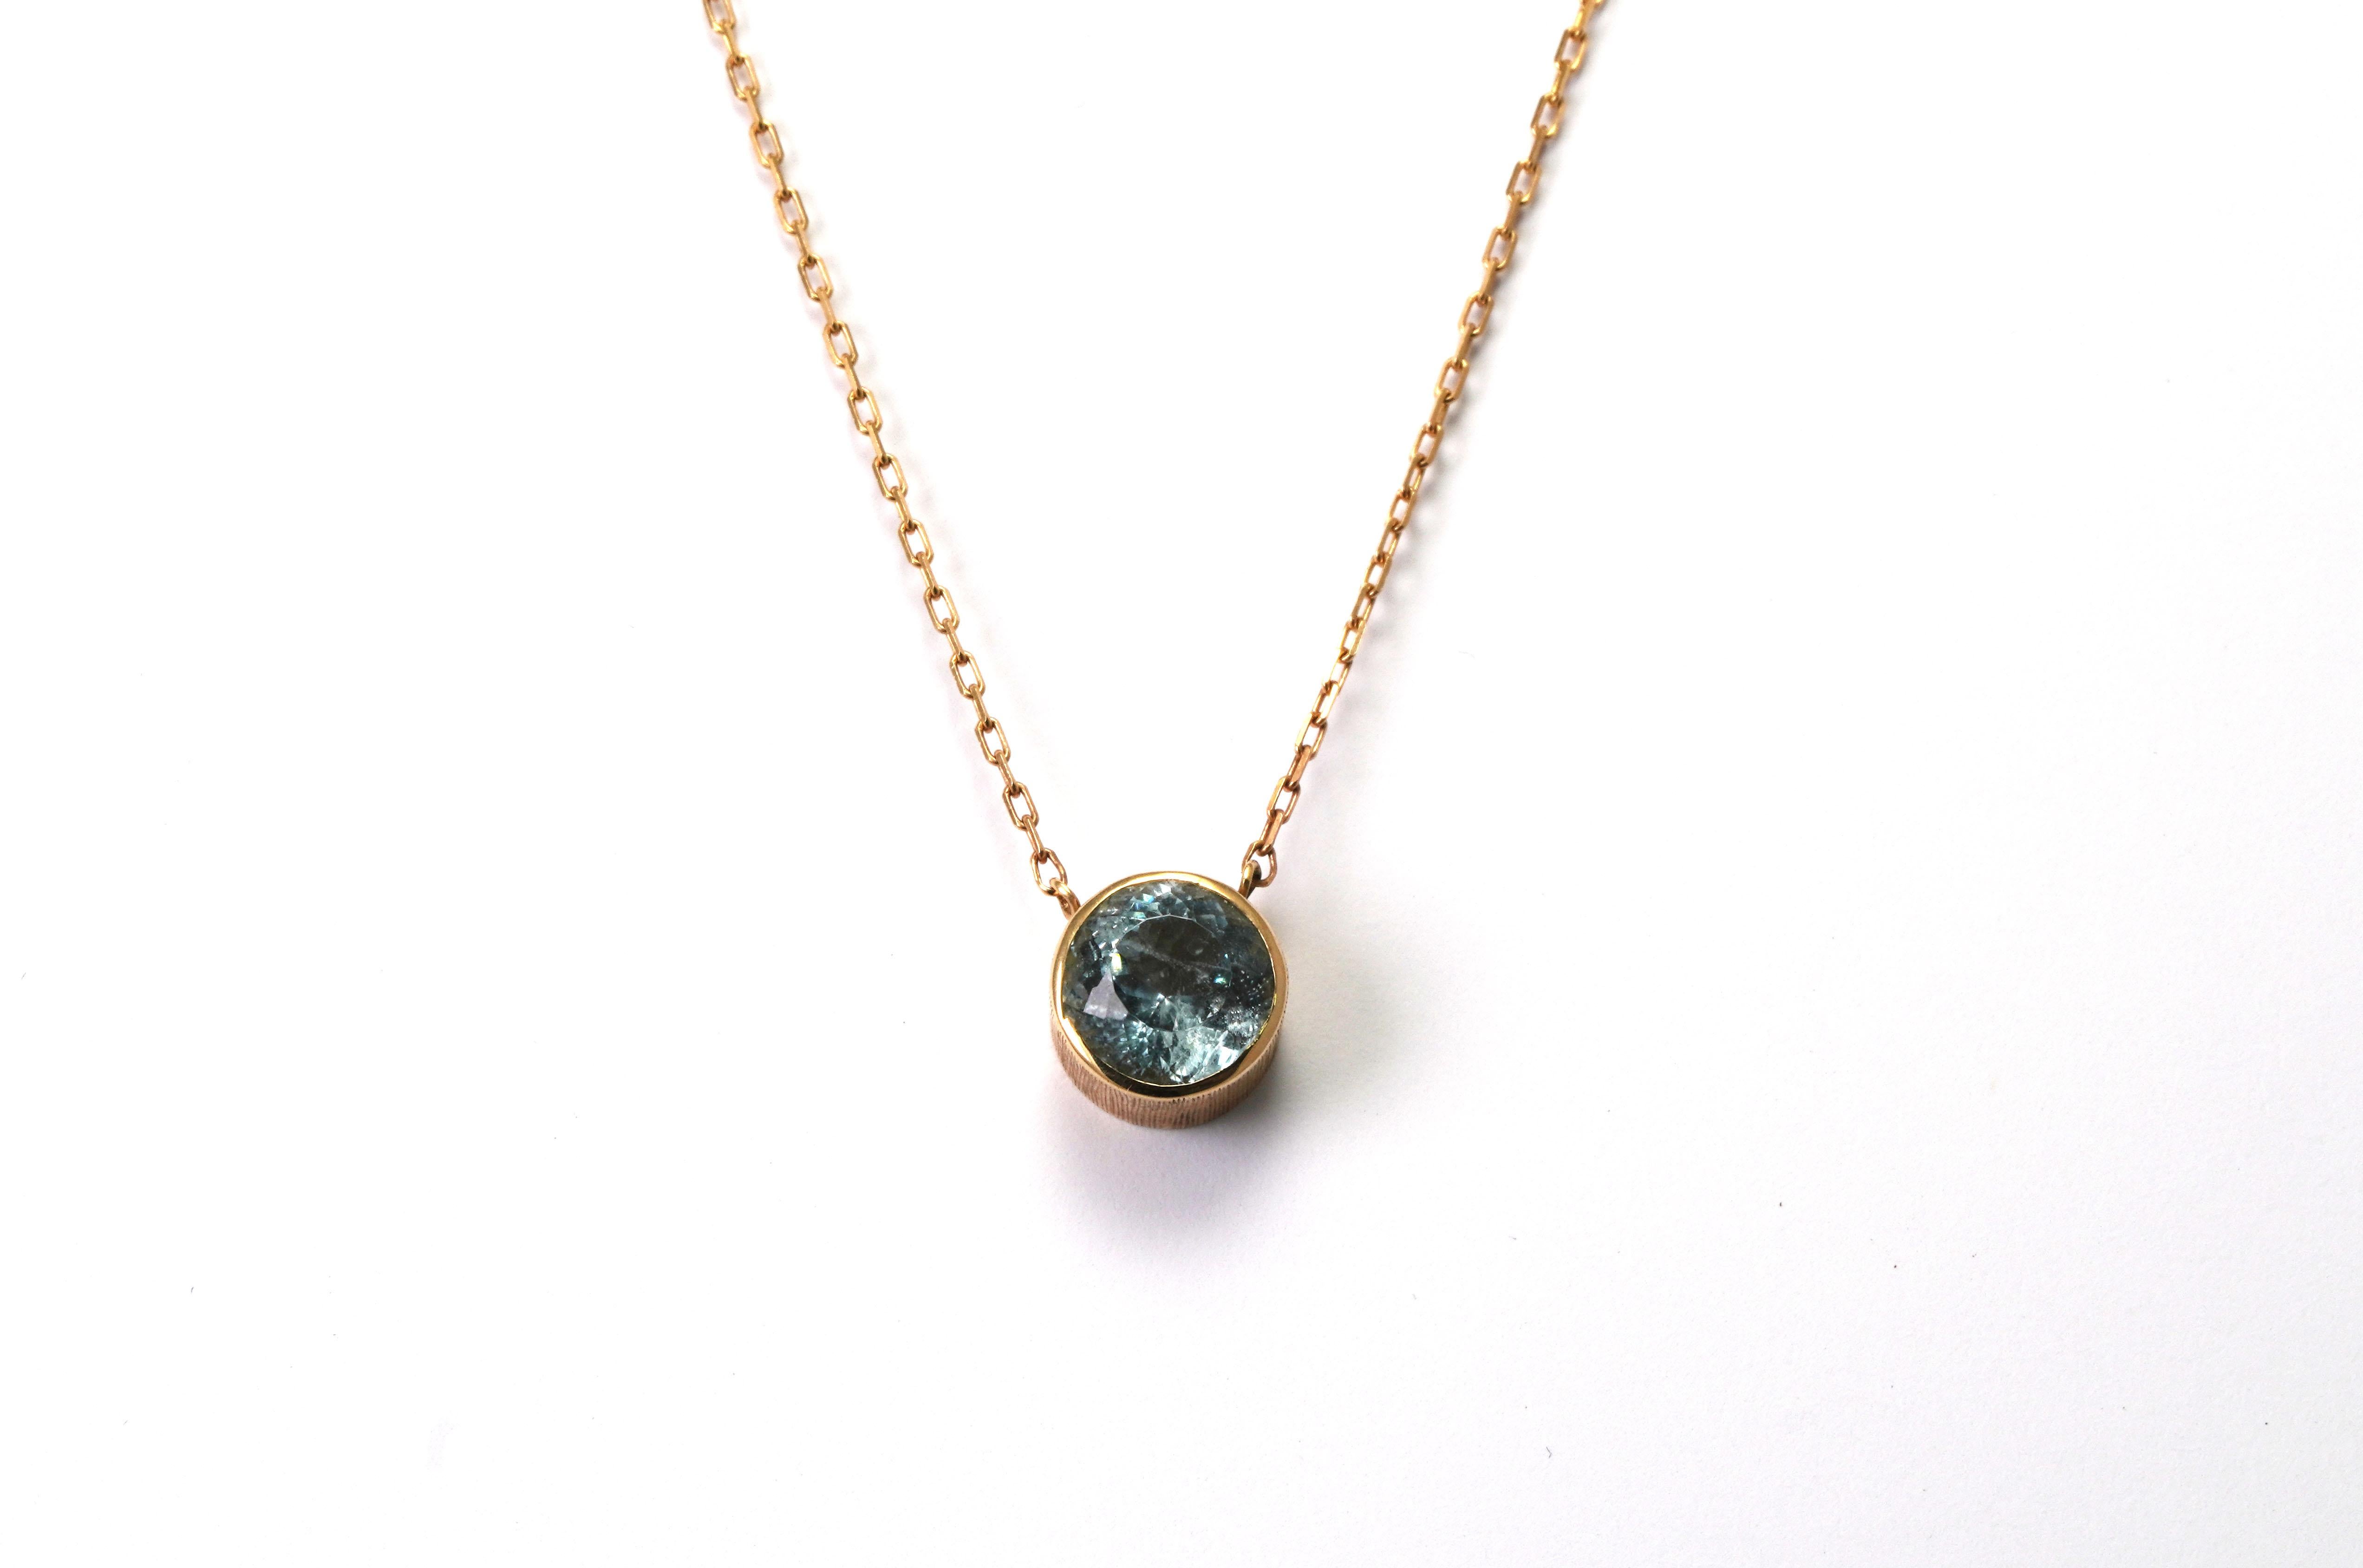 14 kt Gold Necklace with Aquamarine
Gold color: Yellow
Dimensions: 41 cm Length
Total weight: 2.84 grams

Set with:
- Aquamarine
Cut: Round
Weight: 2.29 carat
Color: Blue